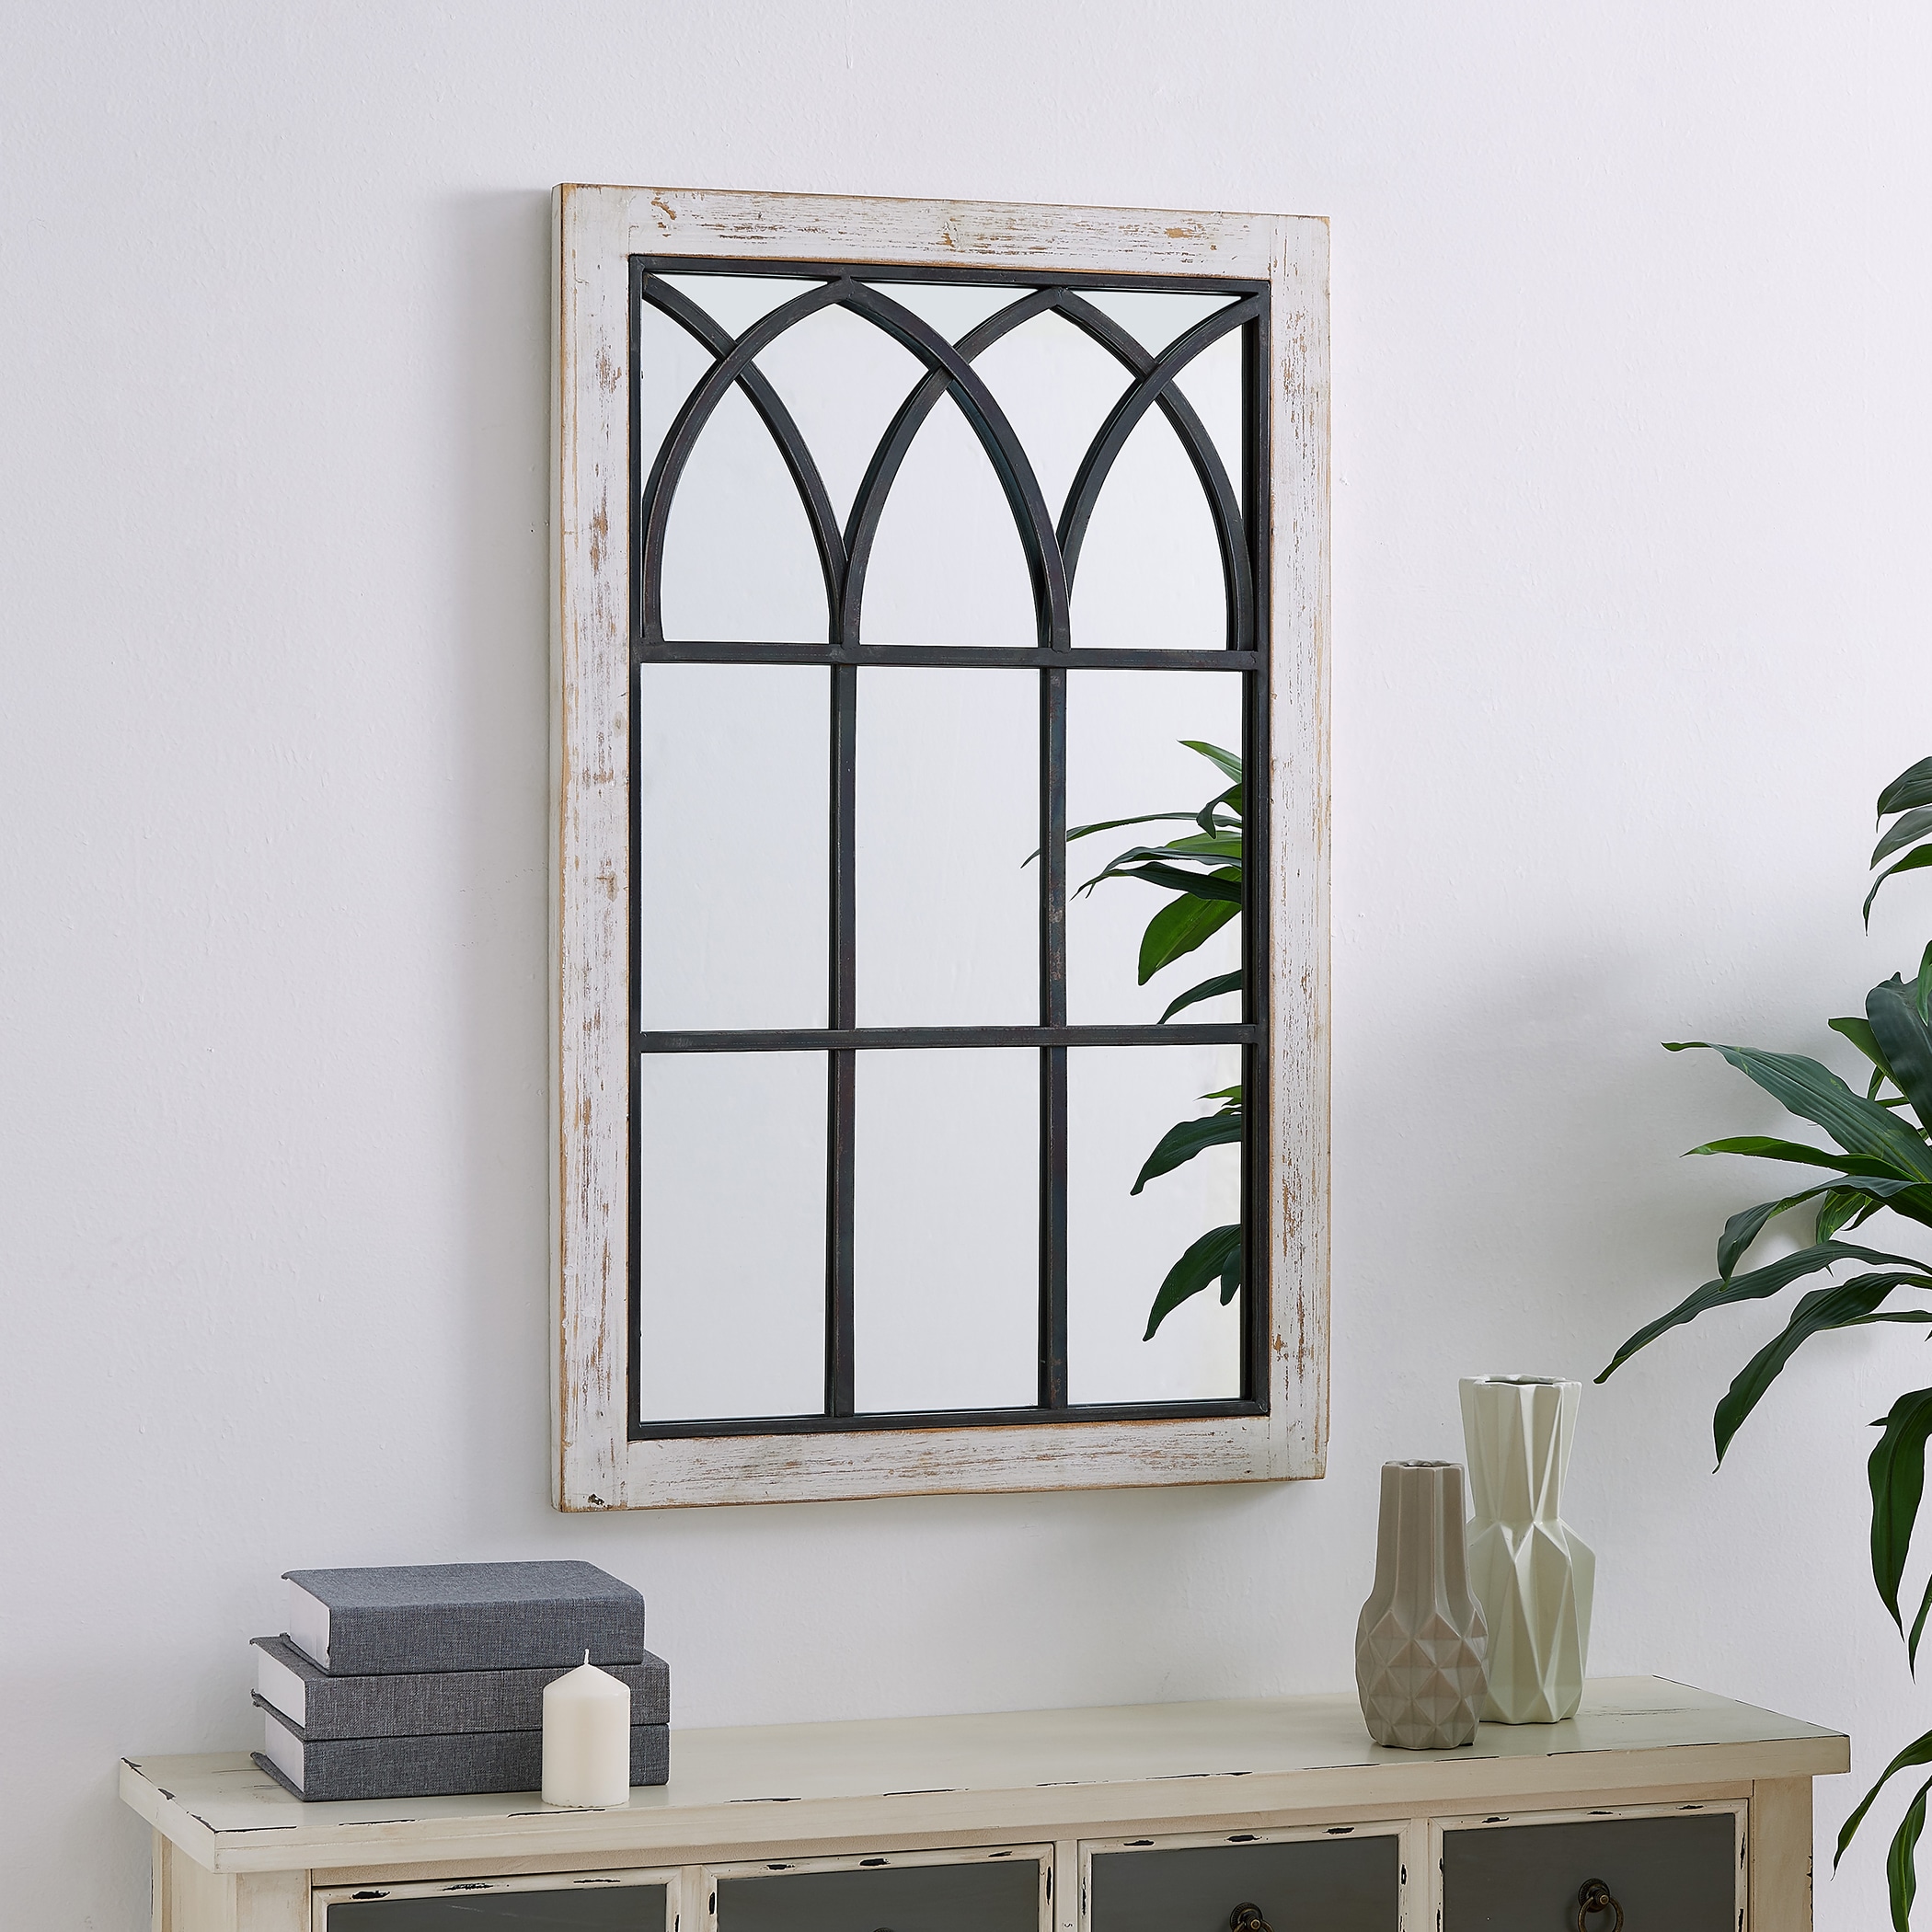 FirsTime FirsTime and Co 24-in W x 37.5-in H Distressed White Framed ...